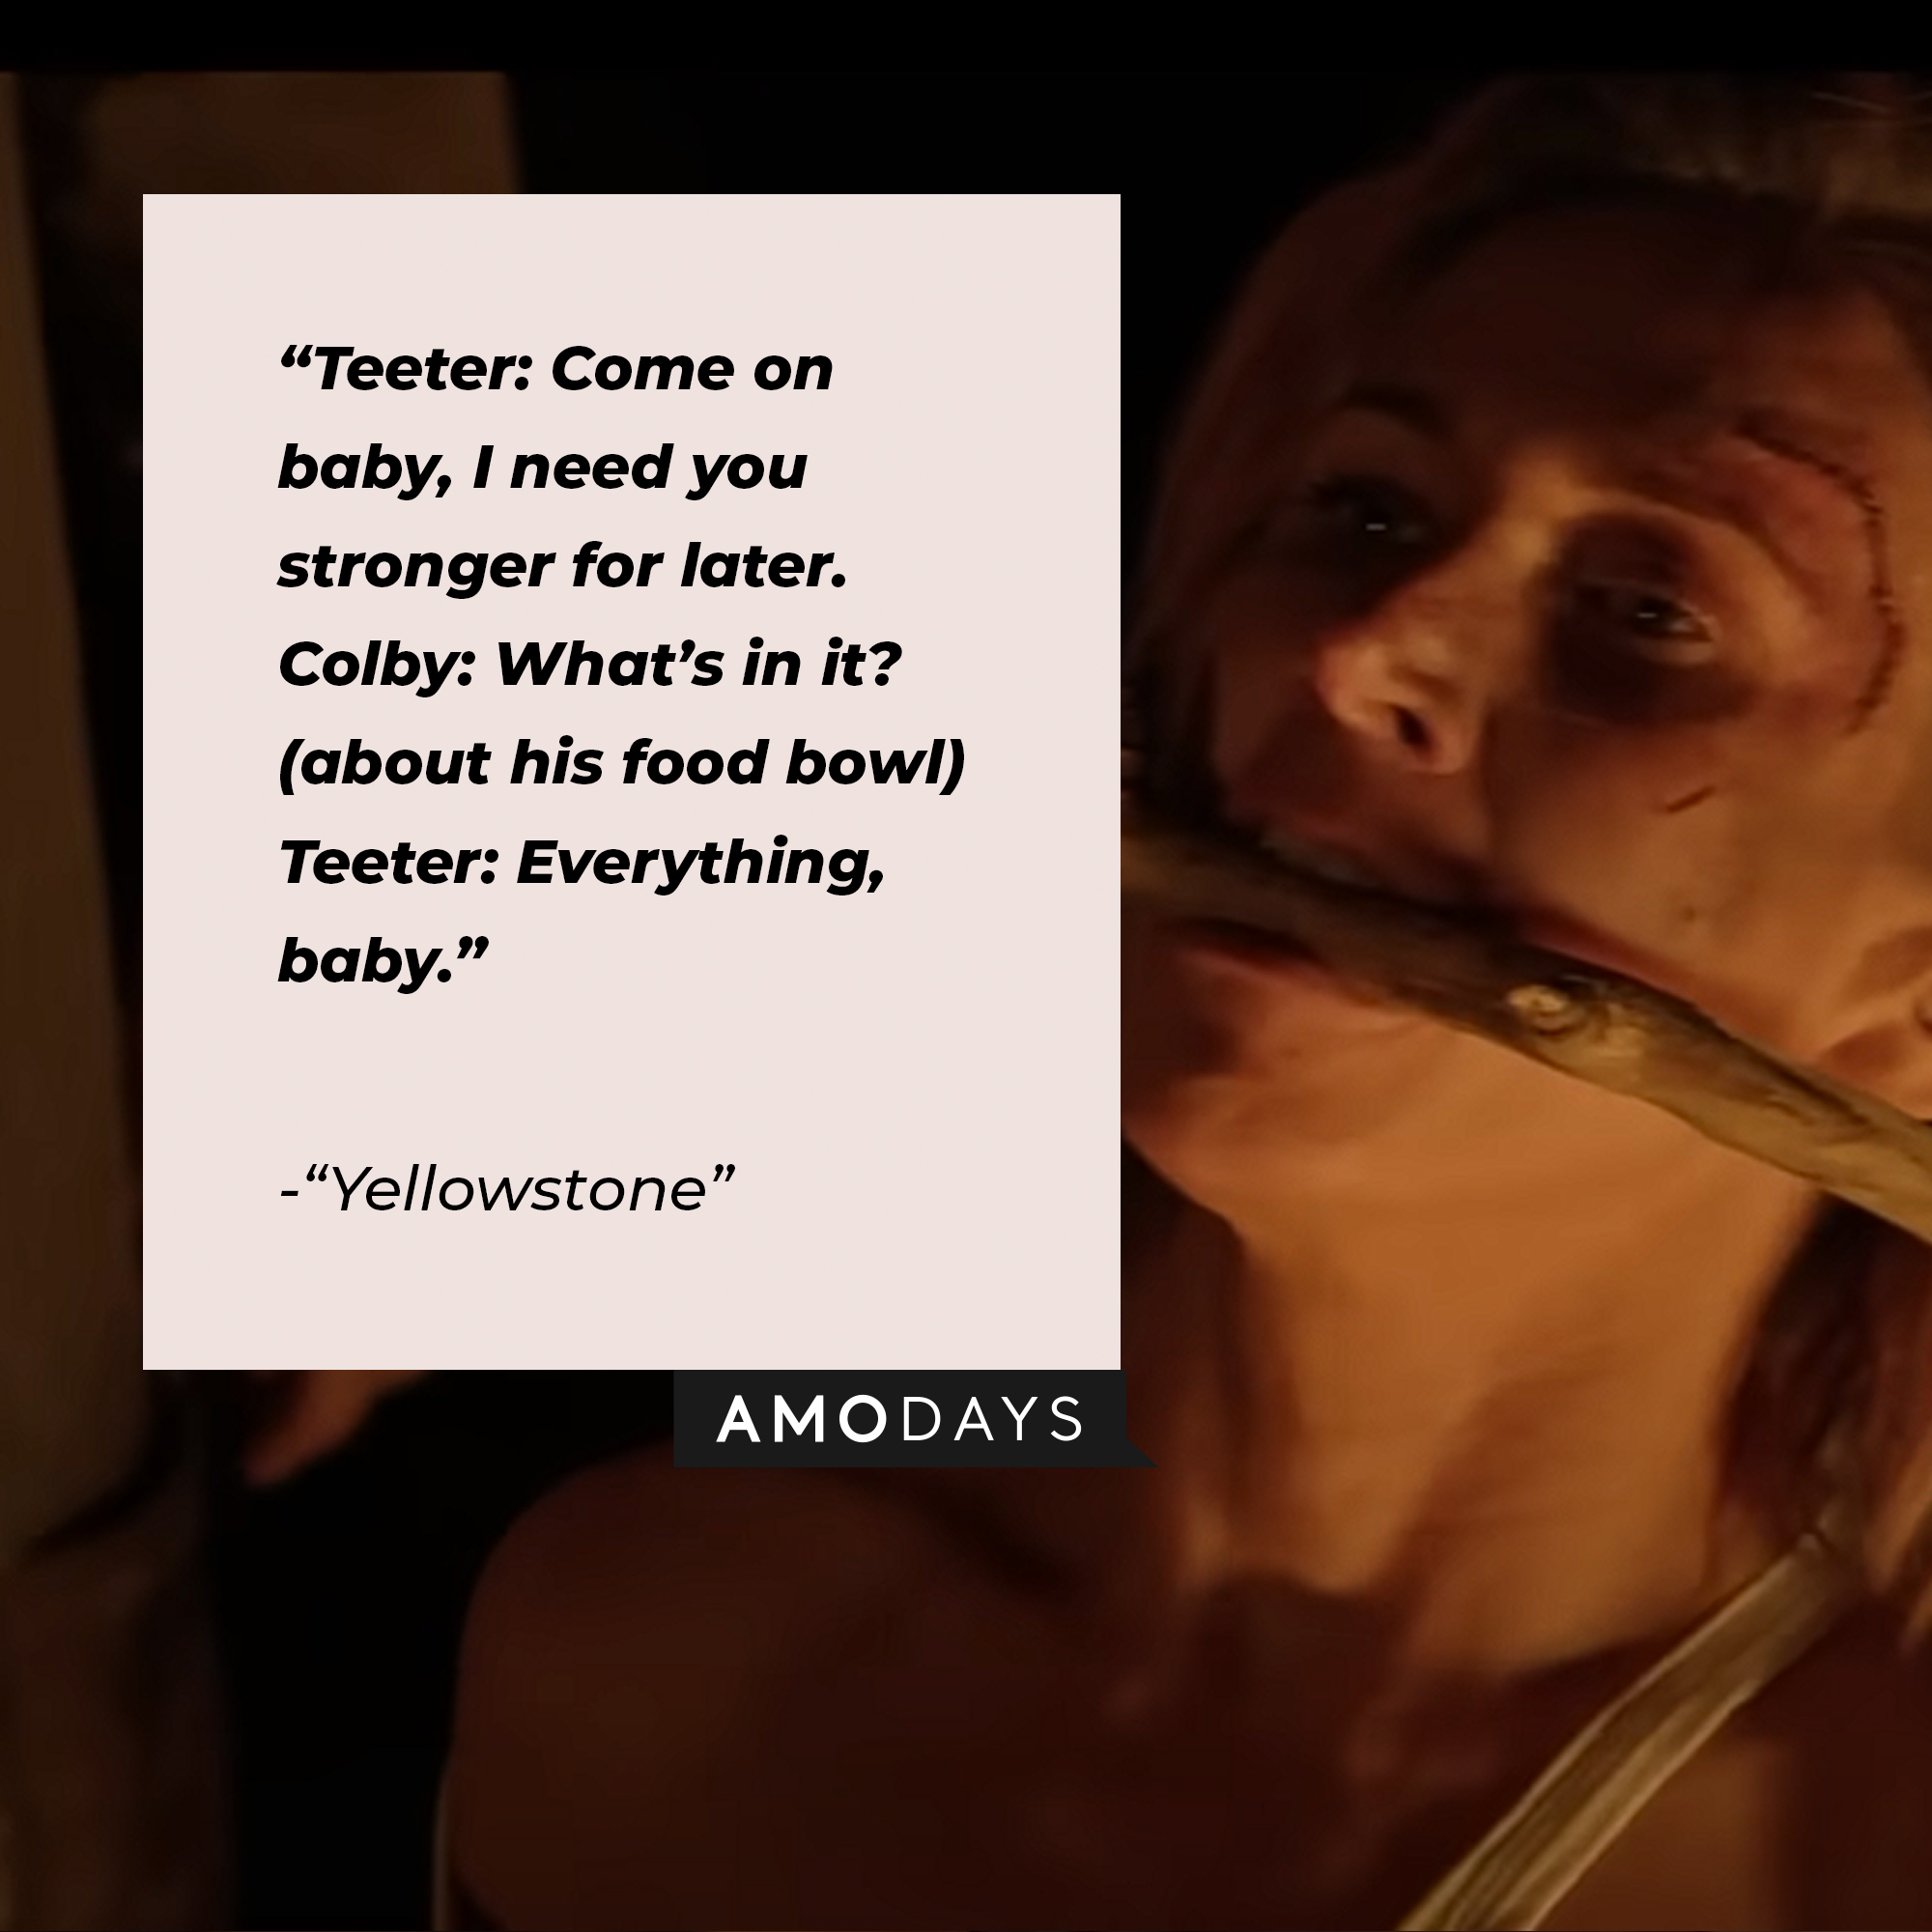 Quote from “Yellowstone”: “Teeter: Come on baby, I need you stronger for later. Colby: What’s in it? (about his food bowl) Teeter: Everything, baby.” | Source: youtube.com/yellowstone